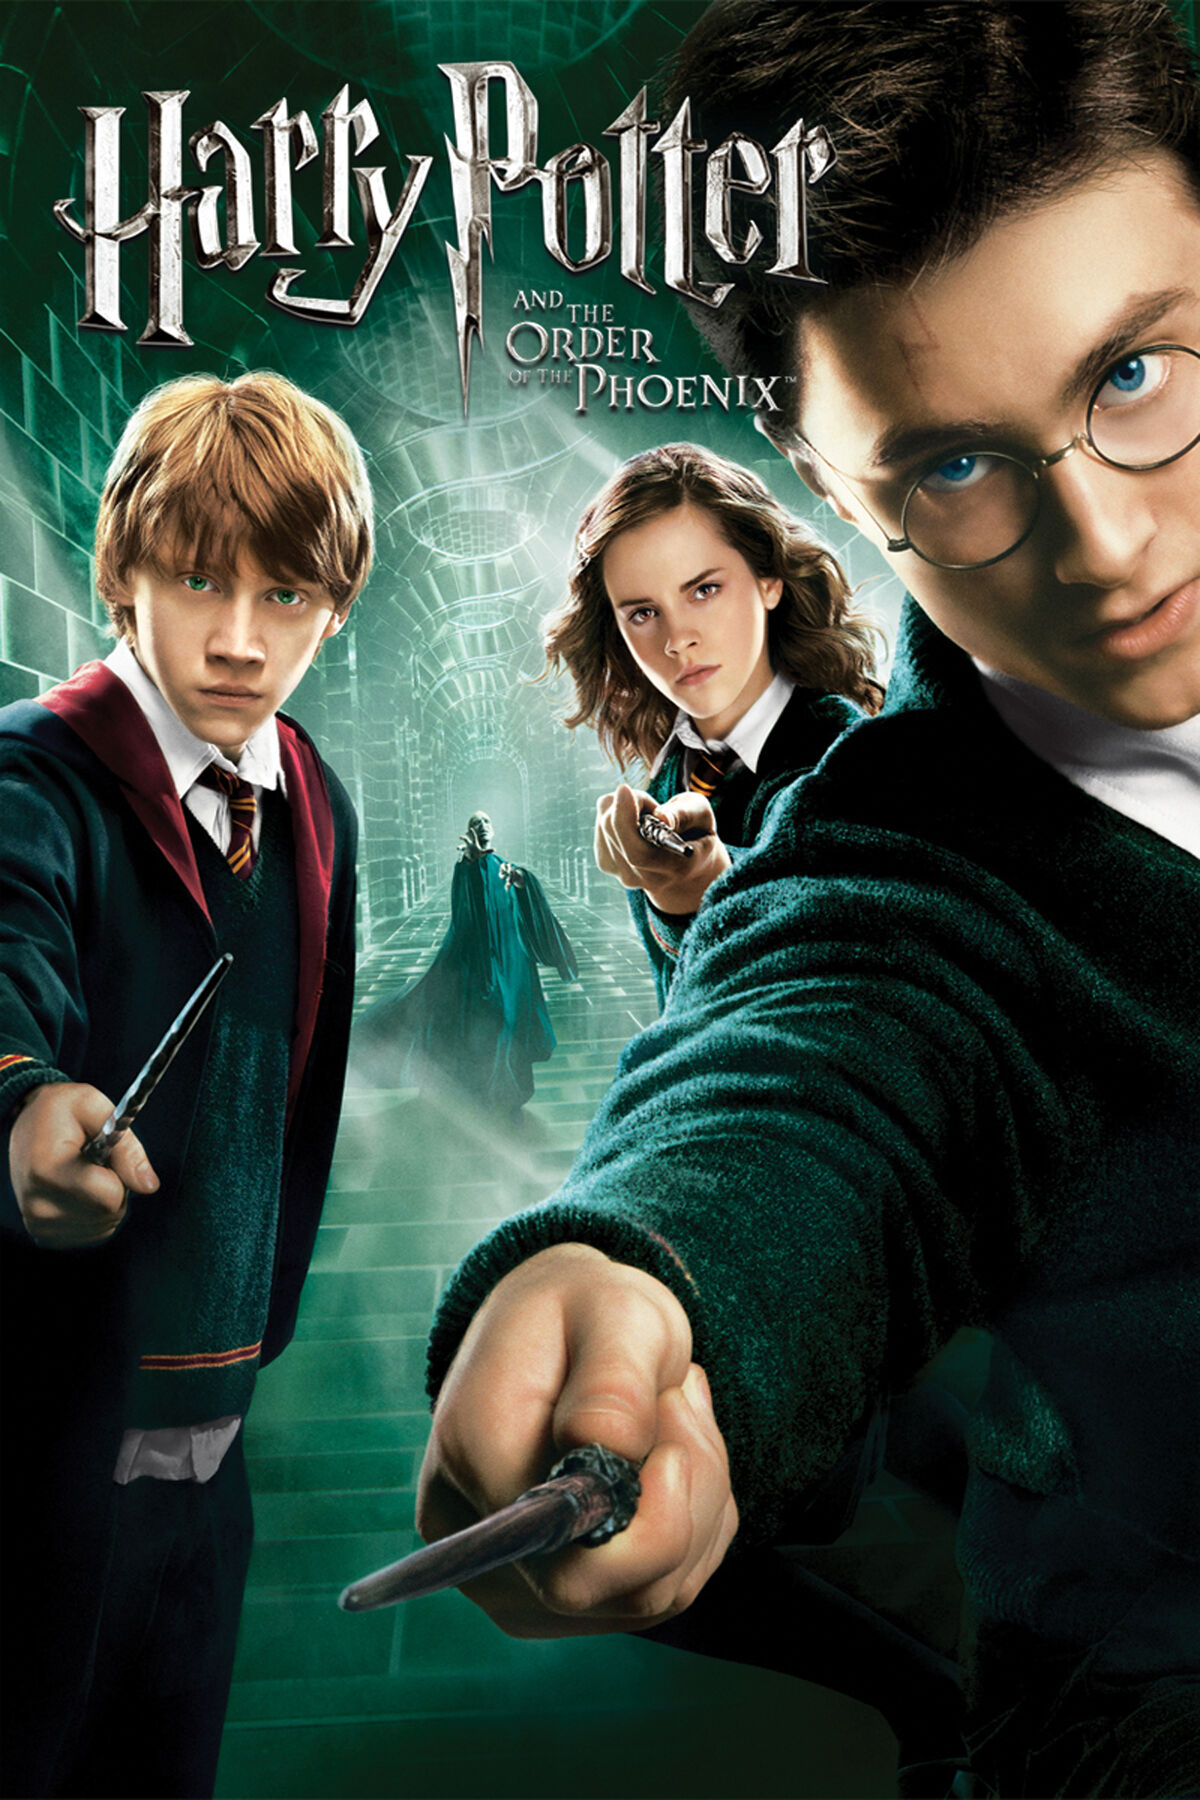 Harry Potter and the Order of the Phoenix (film) - Wikipedia